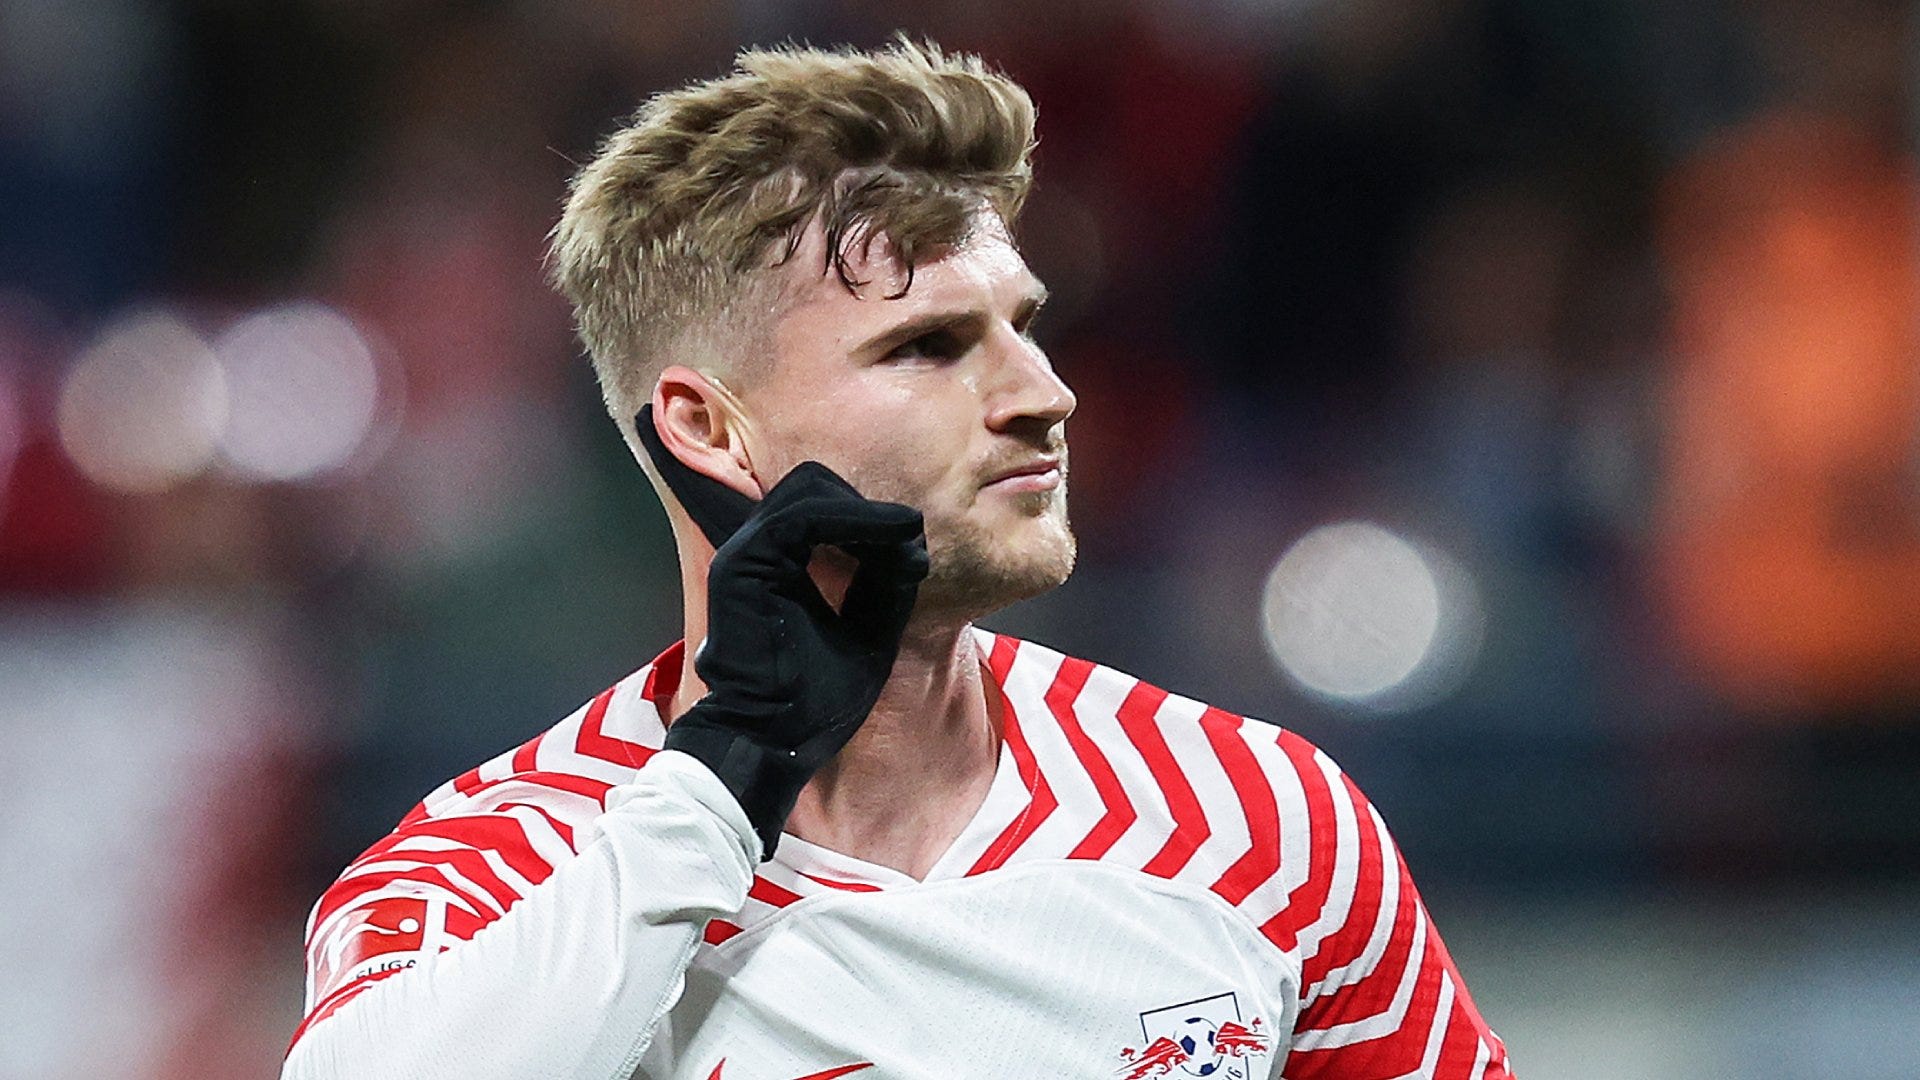 a-january-transfer-for-timo-werner-rb-leipzig-willing-to-let-ex-chelsea-flop-leave-amid-rumours-of-premier-league-return-or-goal-com-india